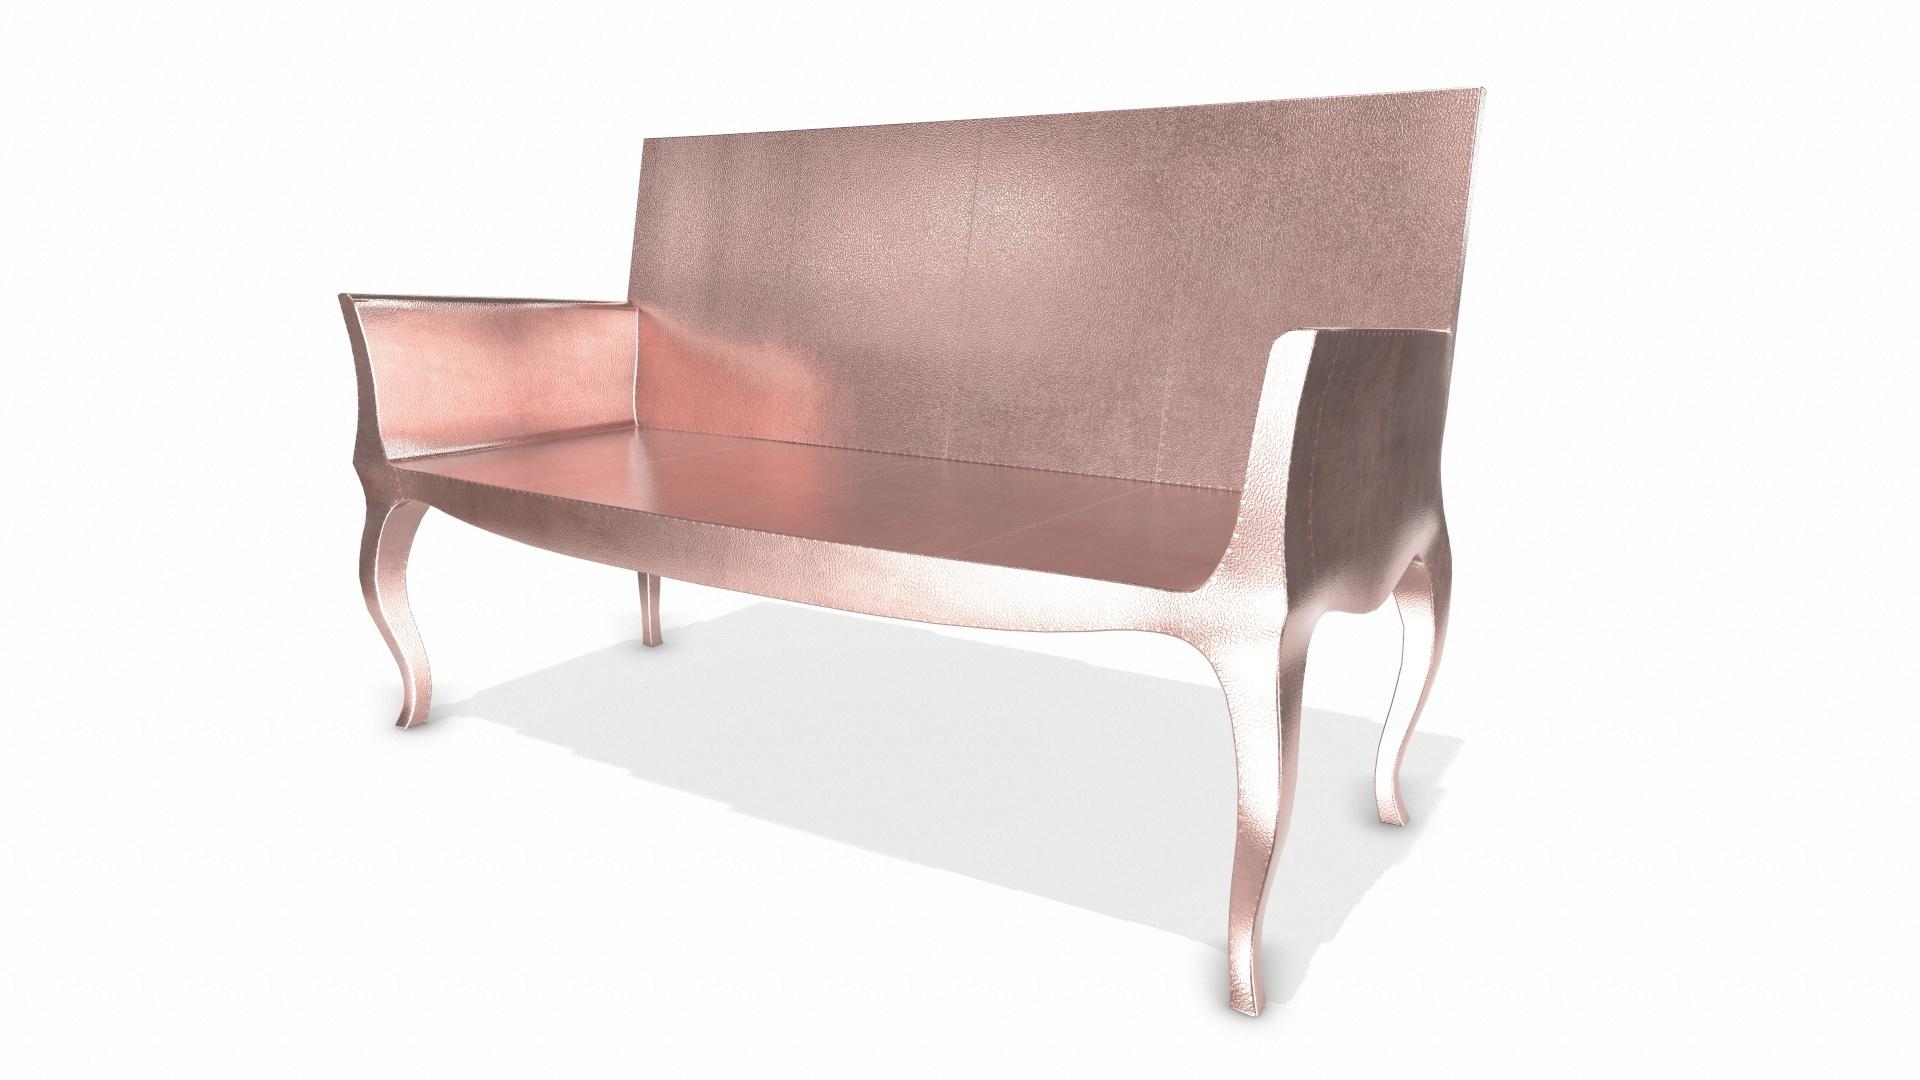 American Louise Settee Art Deco Chaise Longues in Fine Hammered Copper by Paul Mathieu For Sale